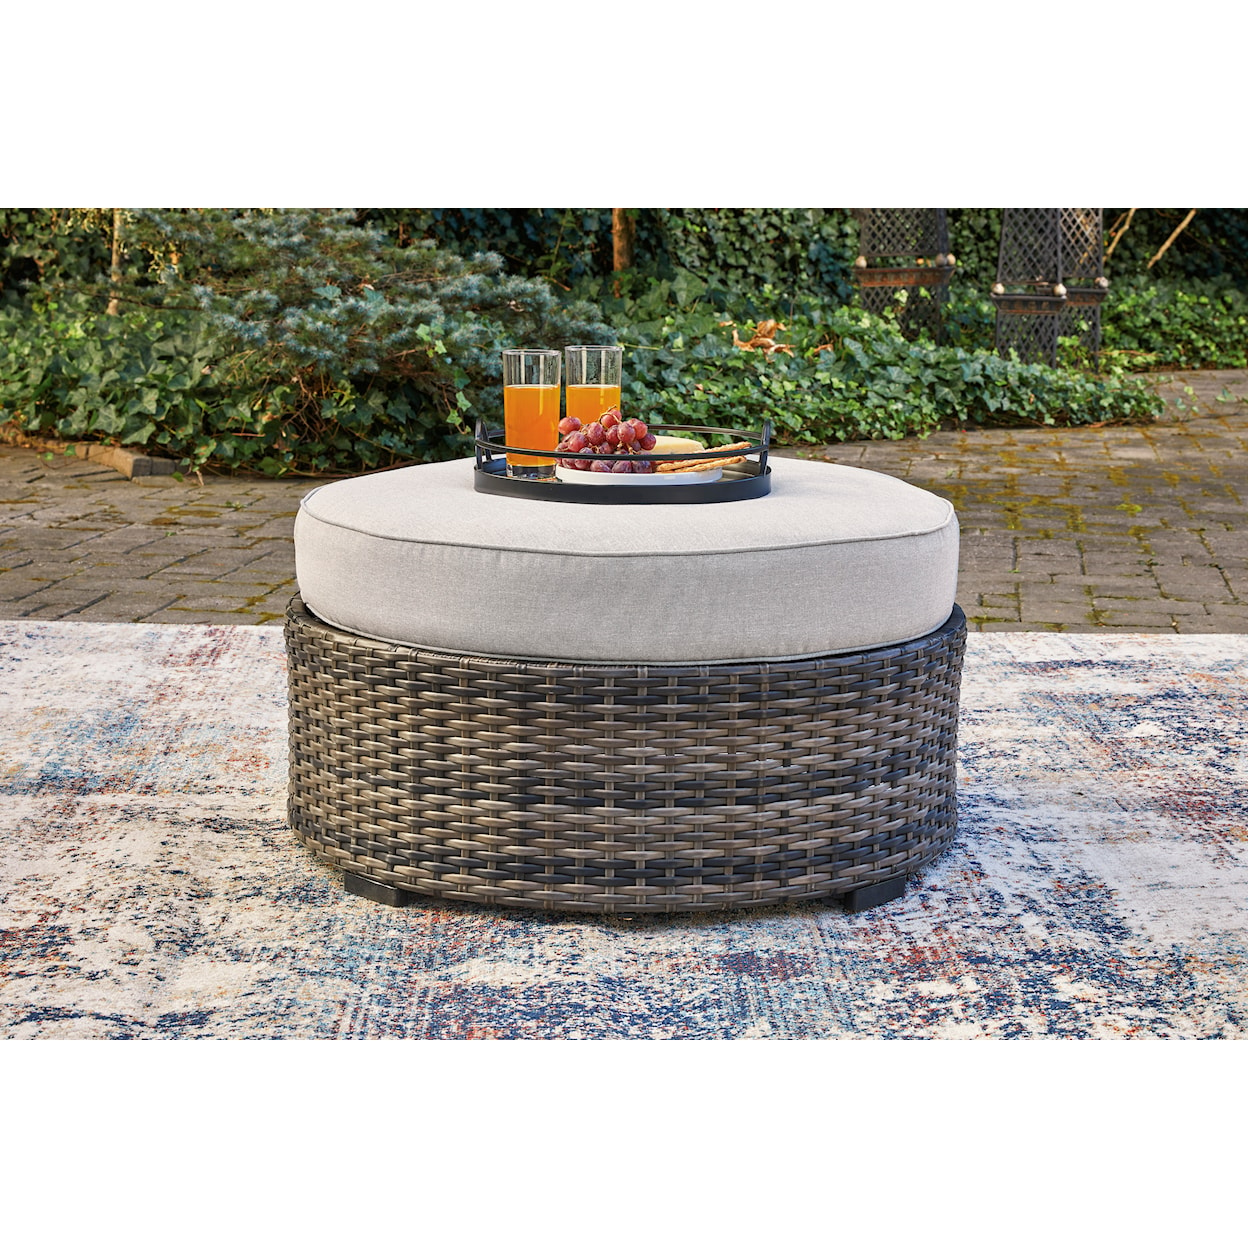 Benchcraft Harbor Court Ottoman with Cushion